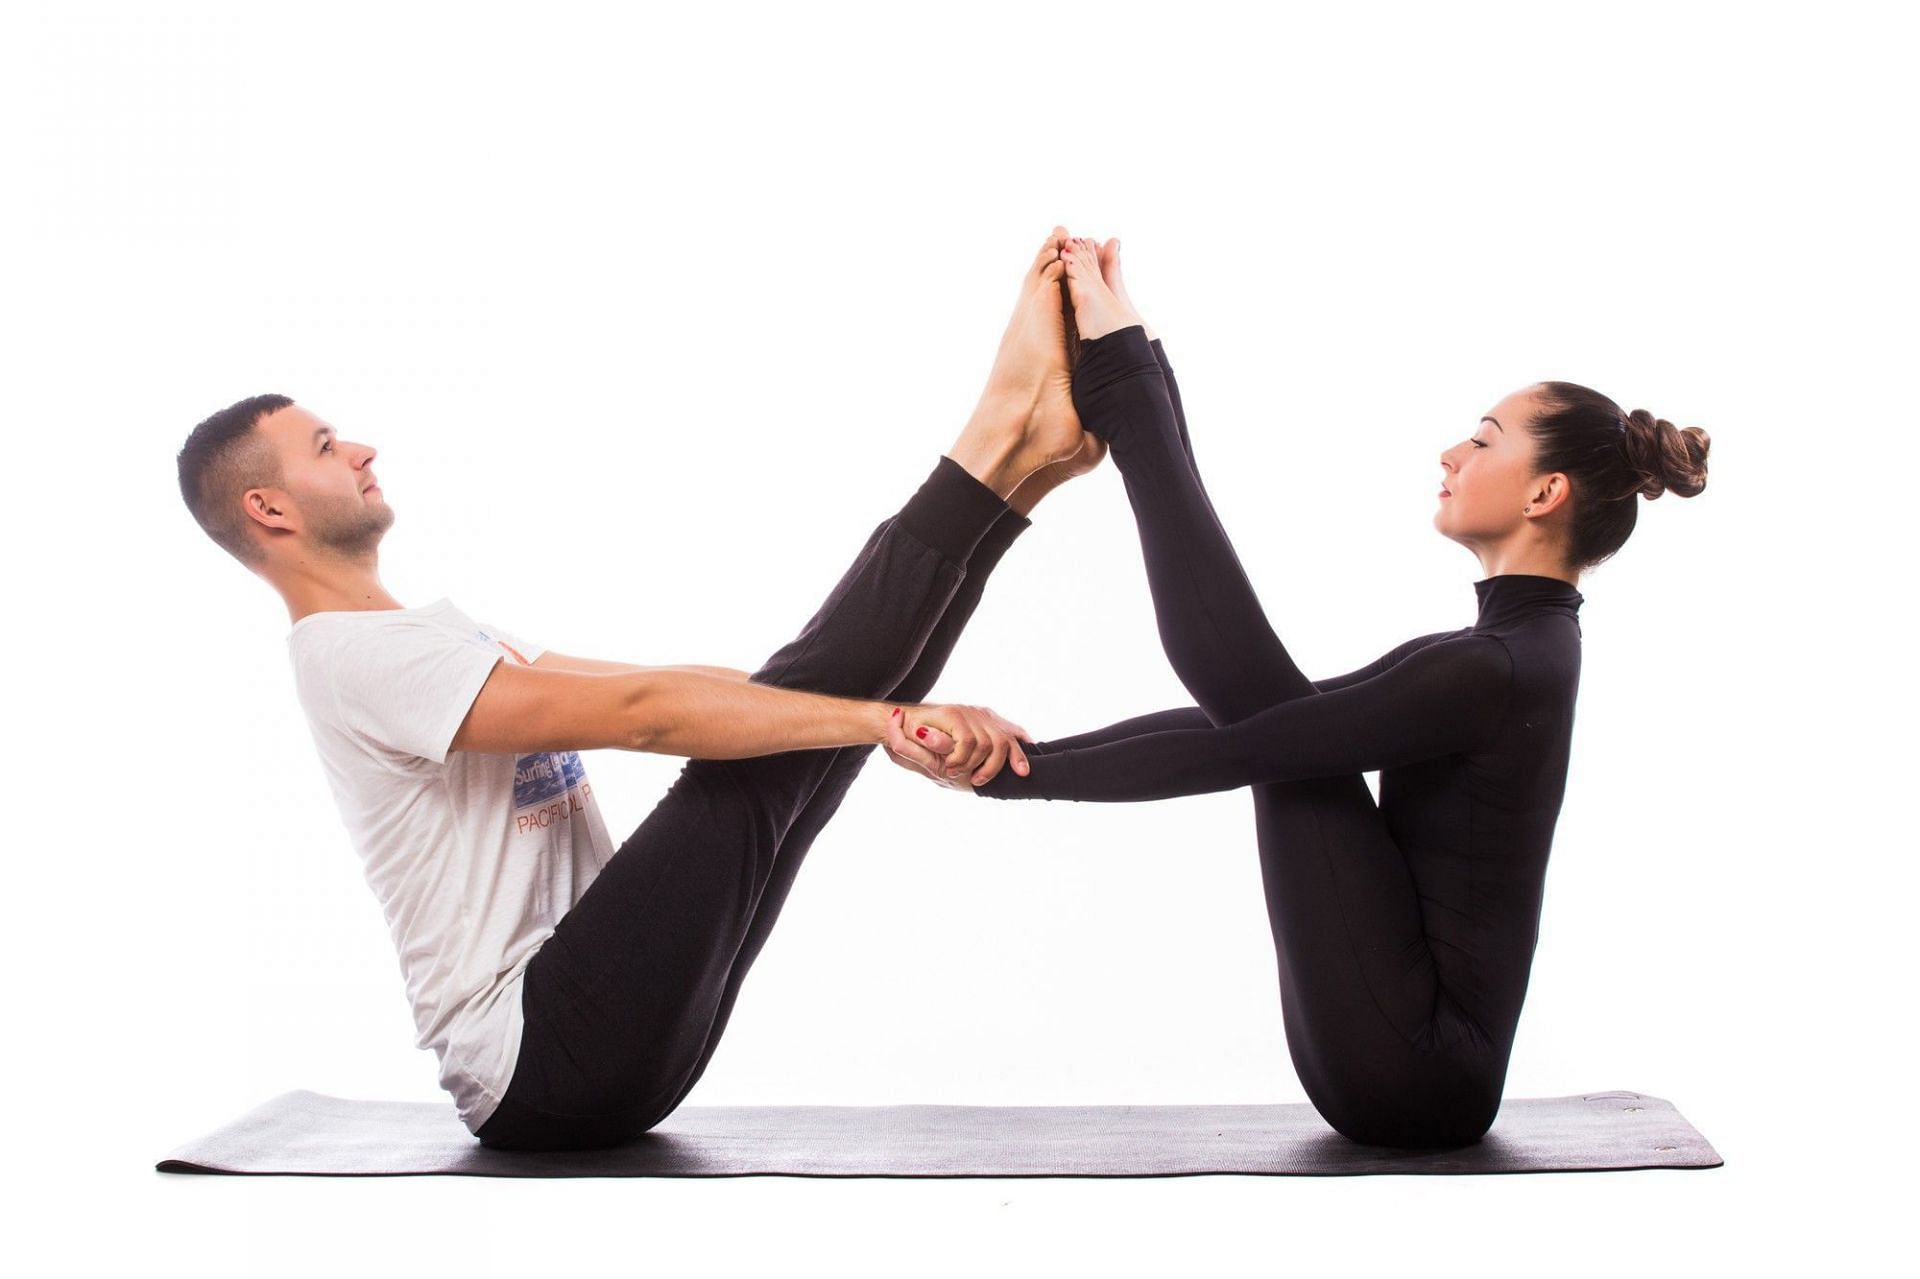 5 couple yoga poses for the fit duo, duo yoga poses - thirstymag.com